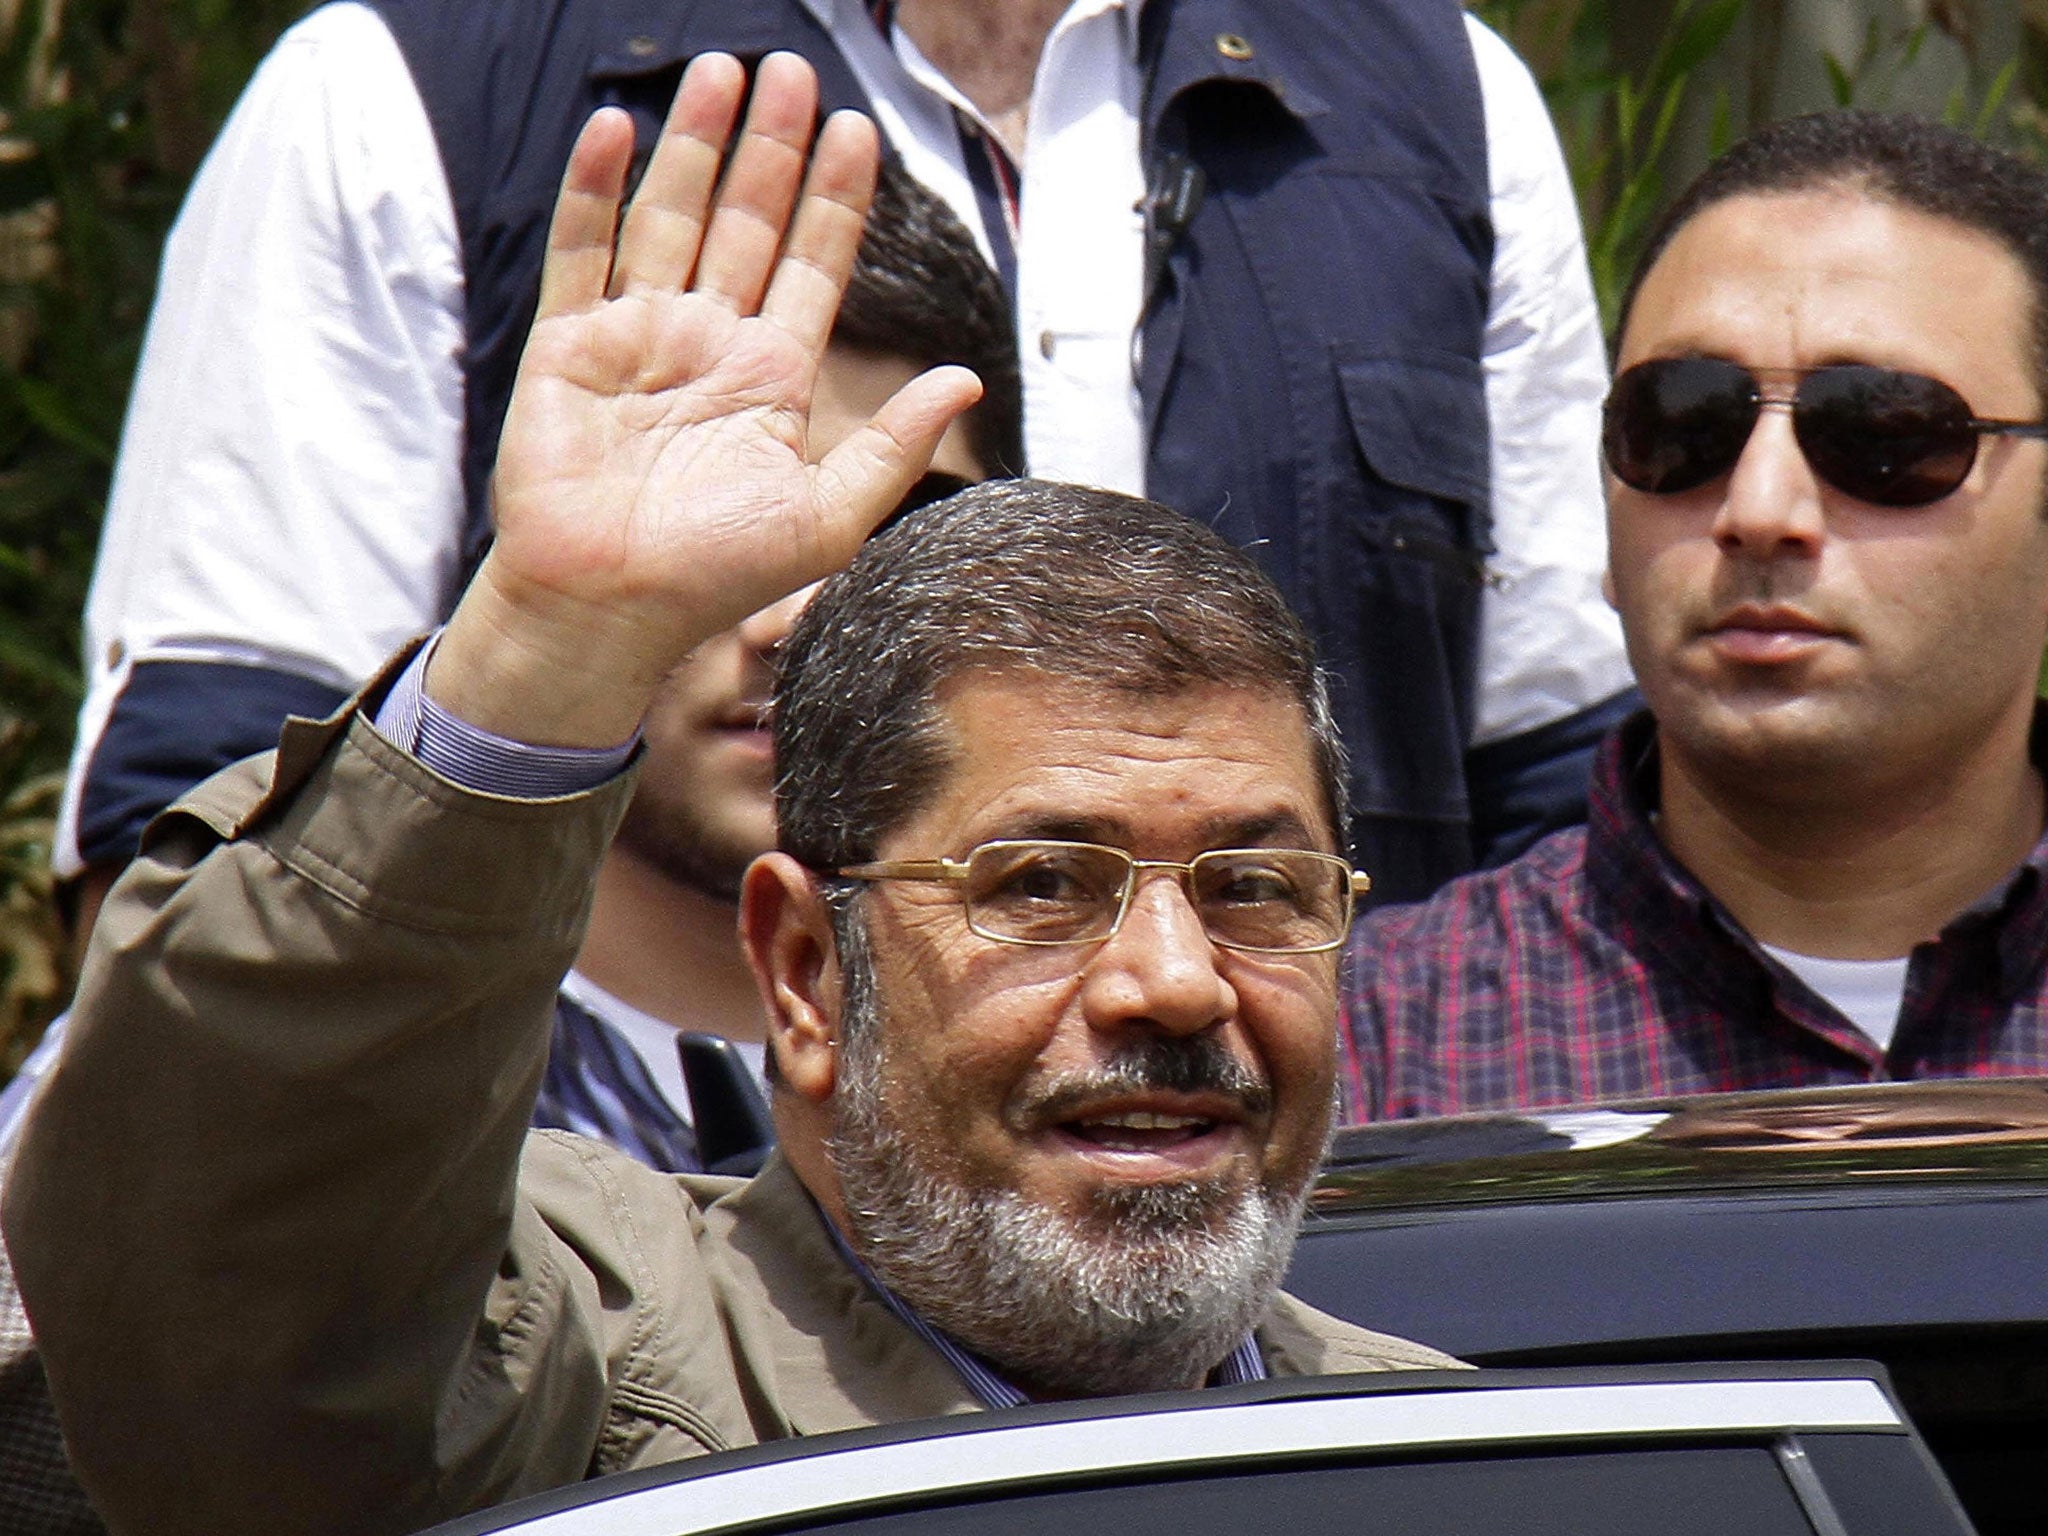 A file image of ousted President Mohamed Morsi, who stands accused of conspiring to commit acts of terrorism in Egypt